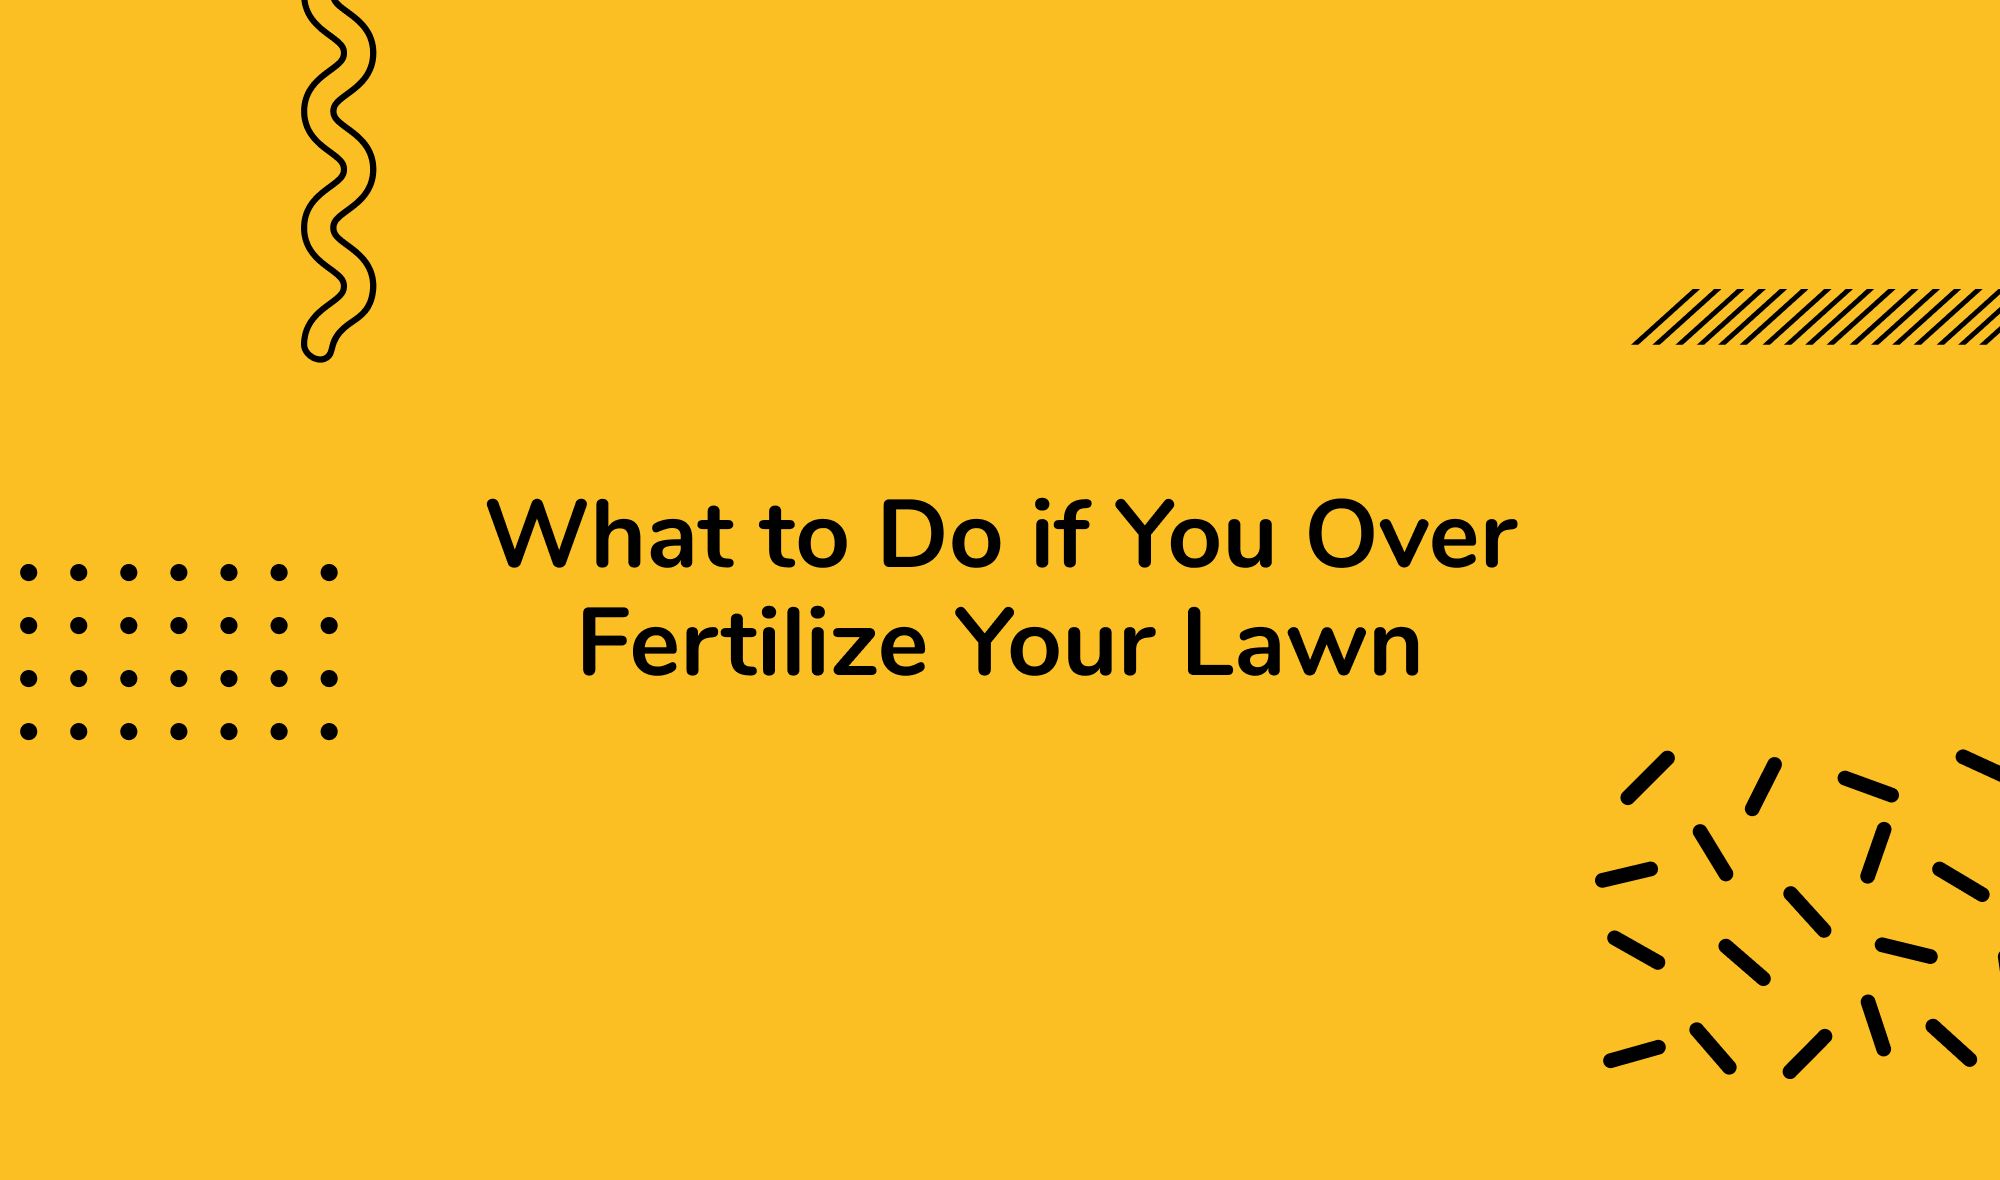 What to Do if You Over Fertilize Your Lawn: Initial Steps